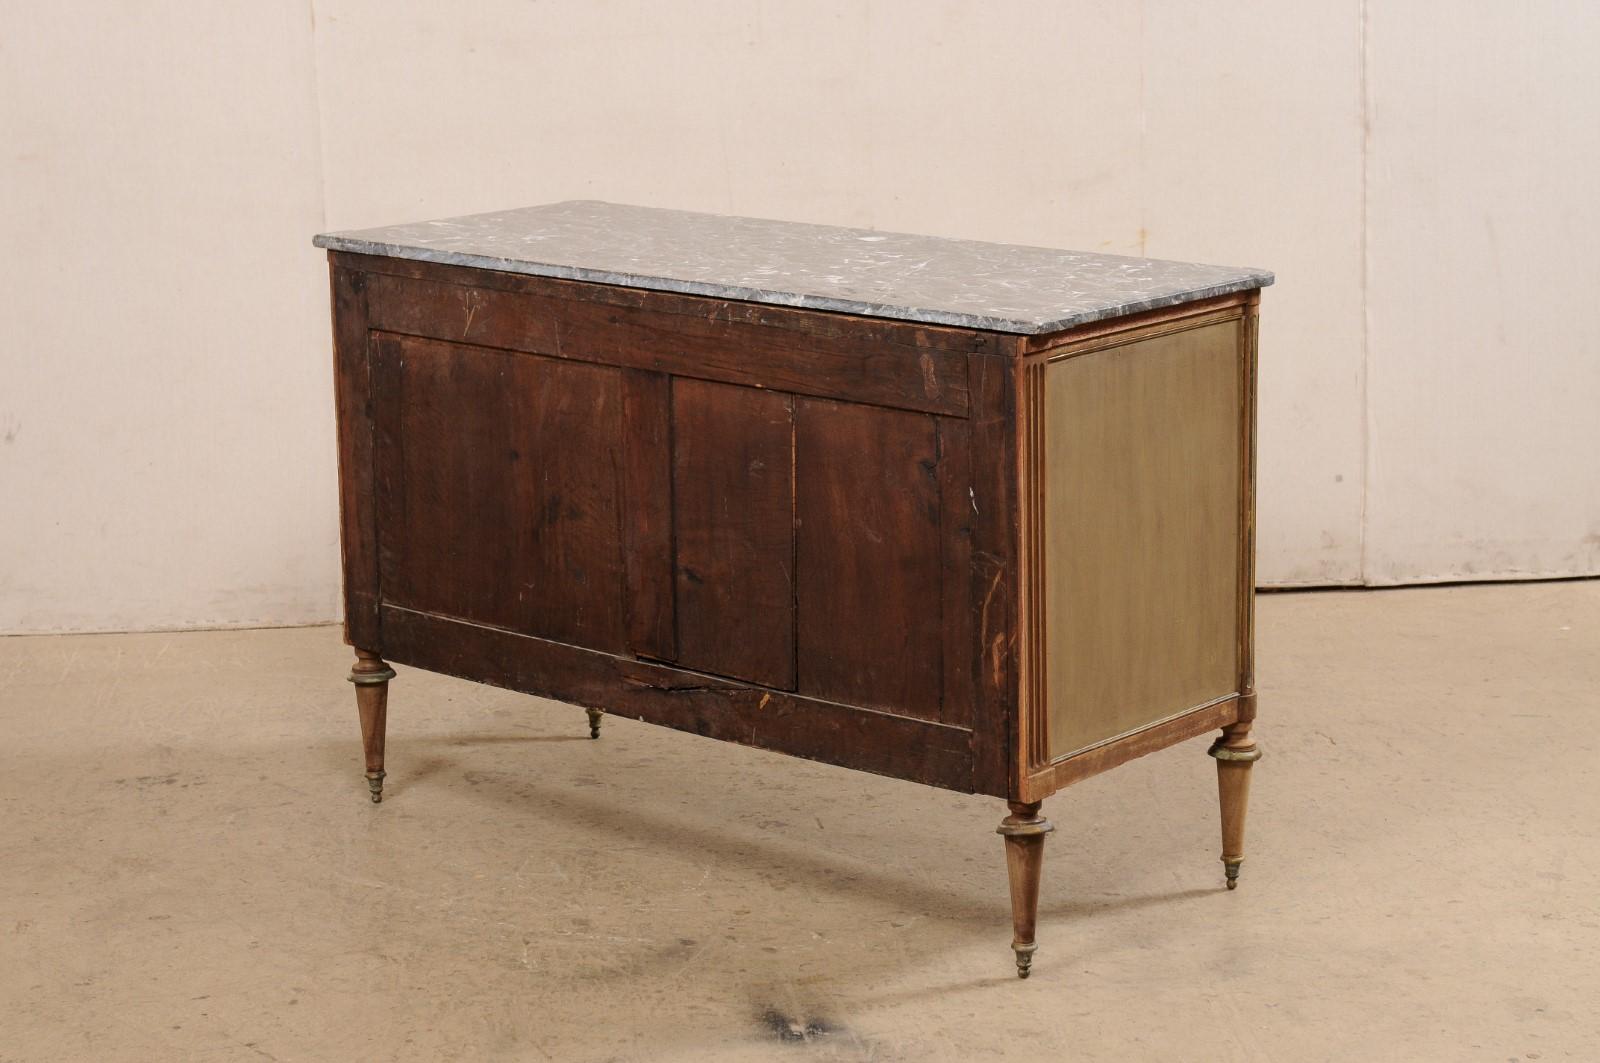 Wood Neoclassic Commode w/its Original Gray Marble Top & Brass Trimmings/Hardware